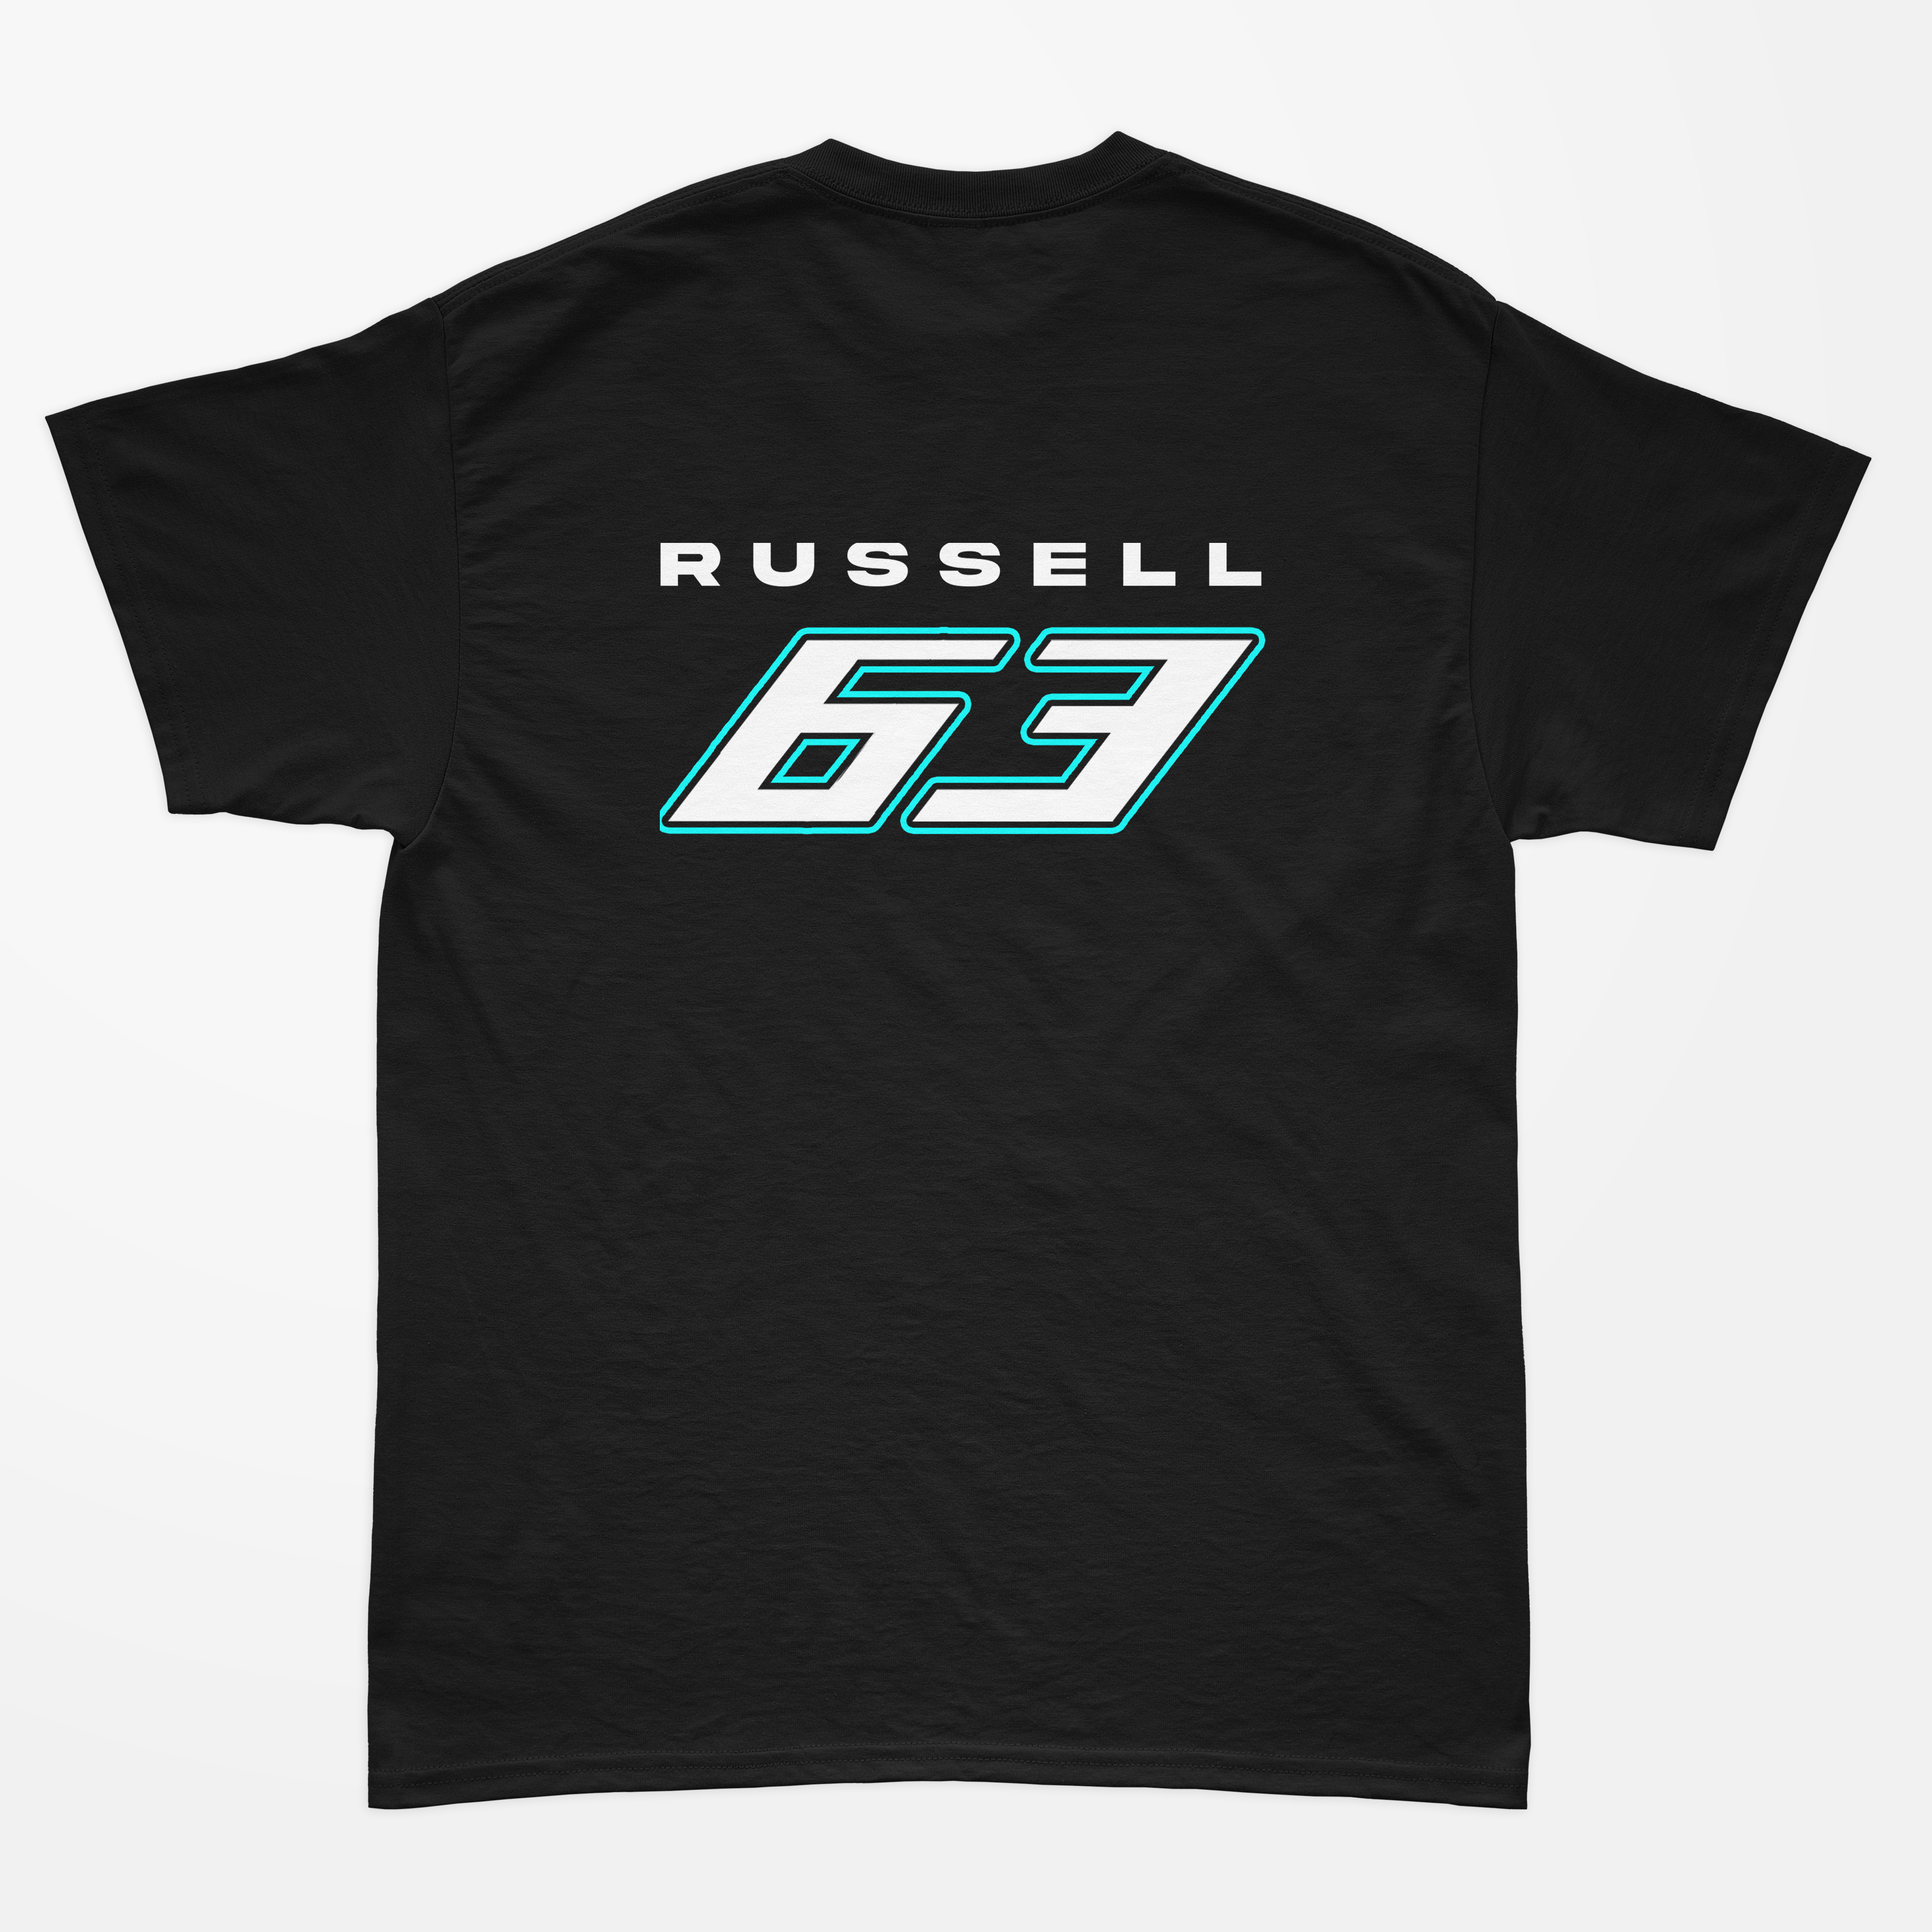 Camiseta Casual George Russell - Autofãs Store